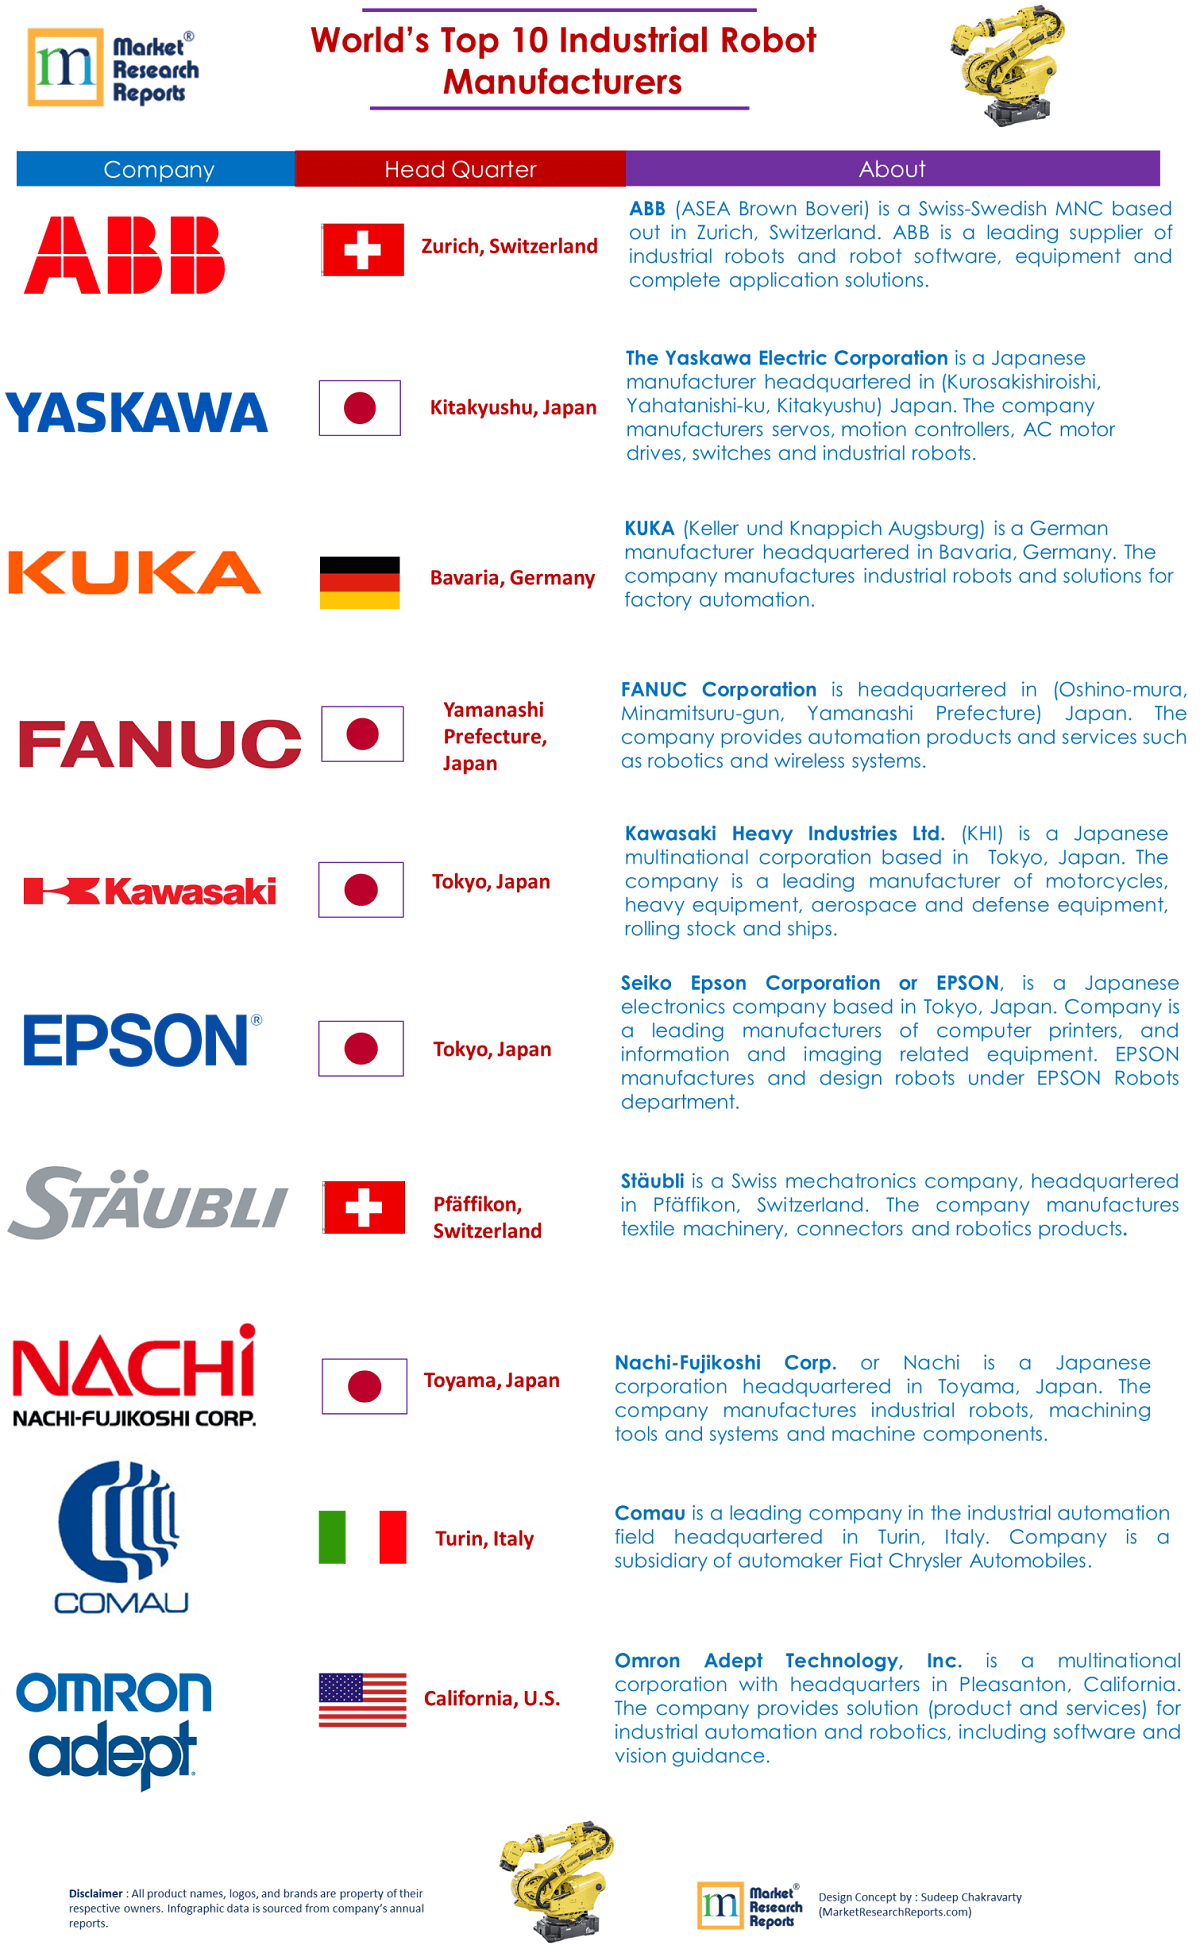 worlds_top_10_industrial_robot_manufacturers.png